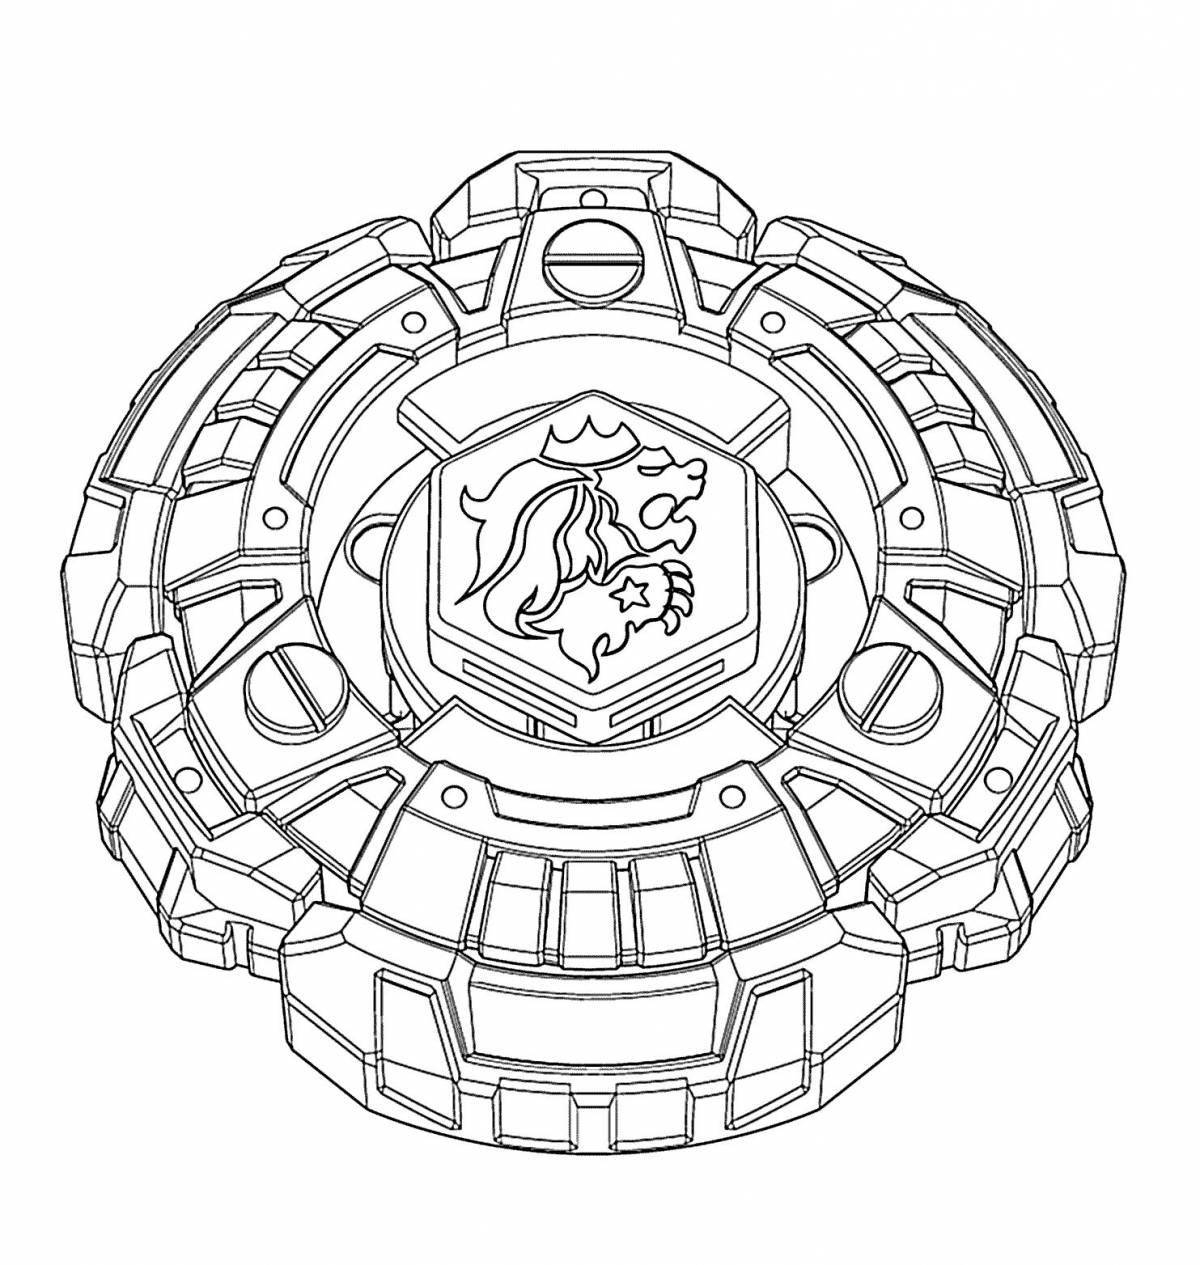 Playful beyblade burst coloring page